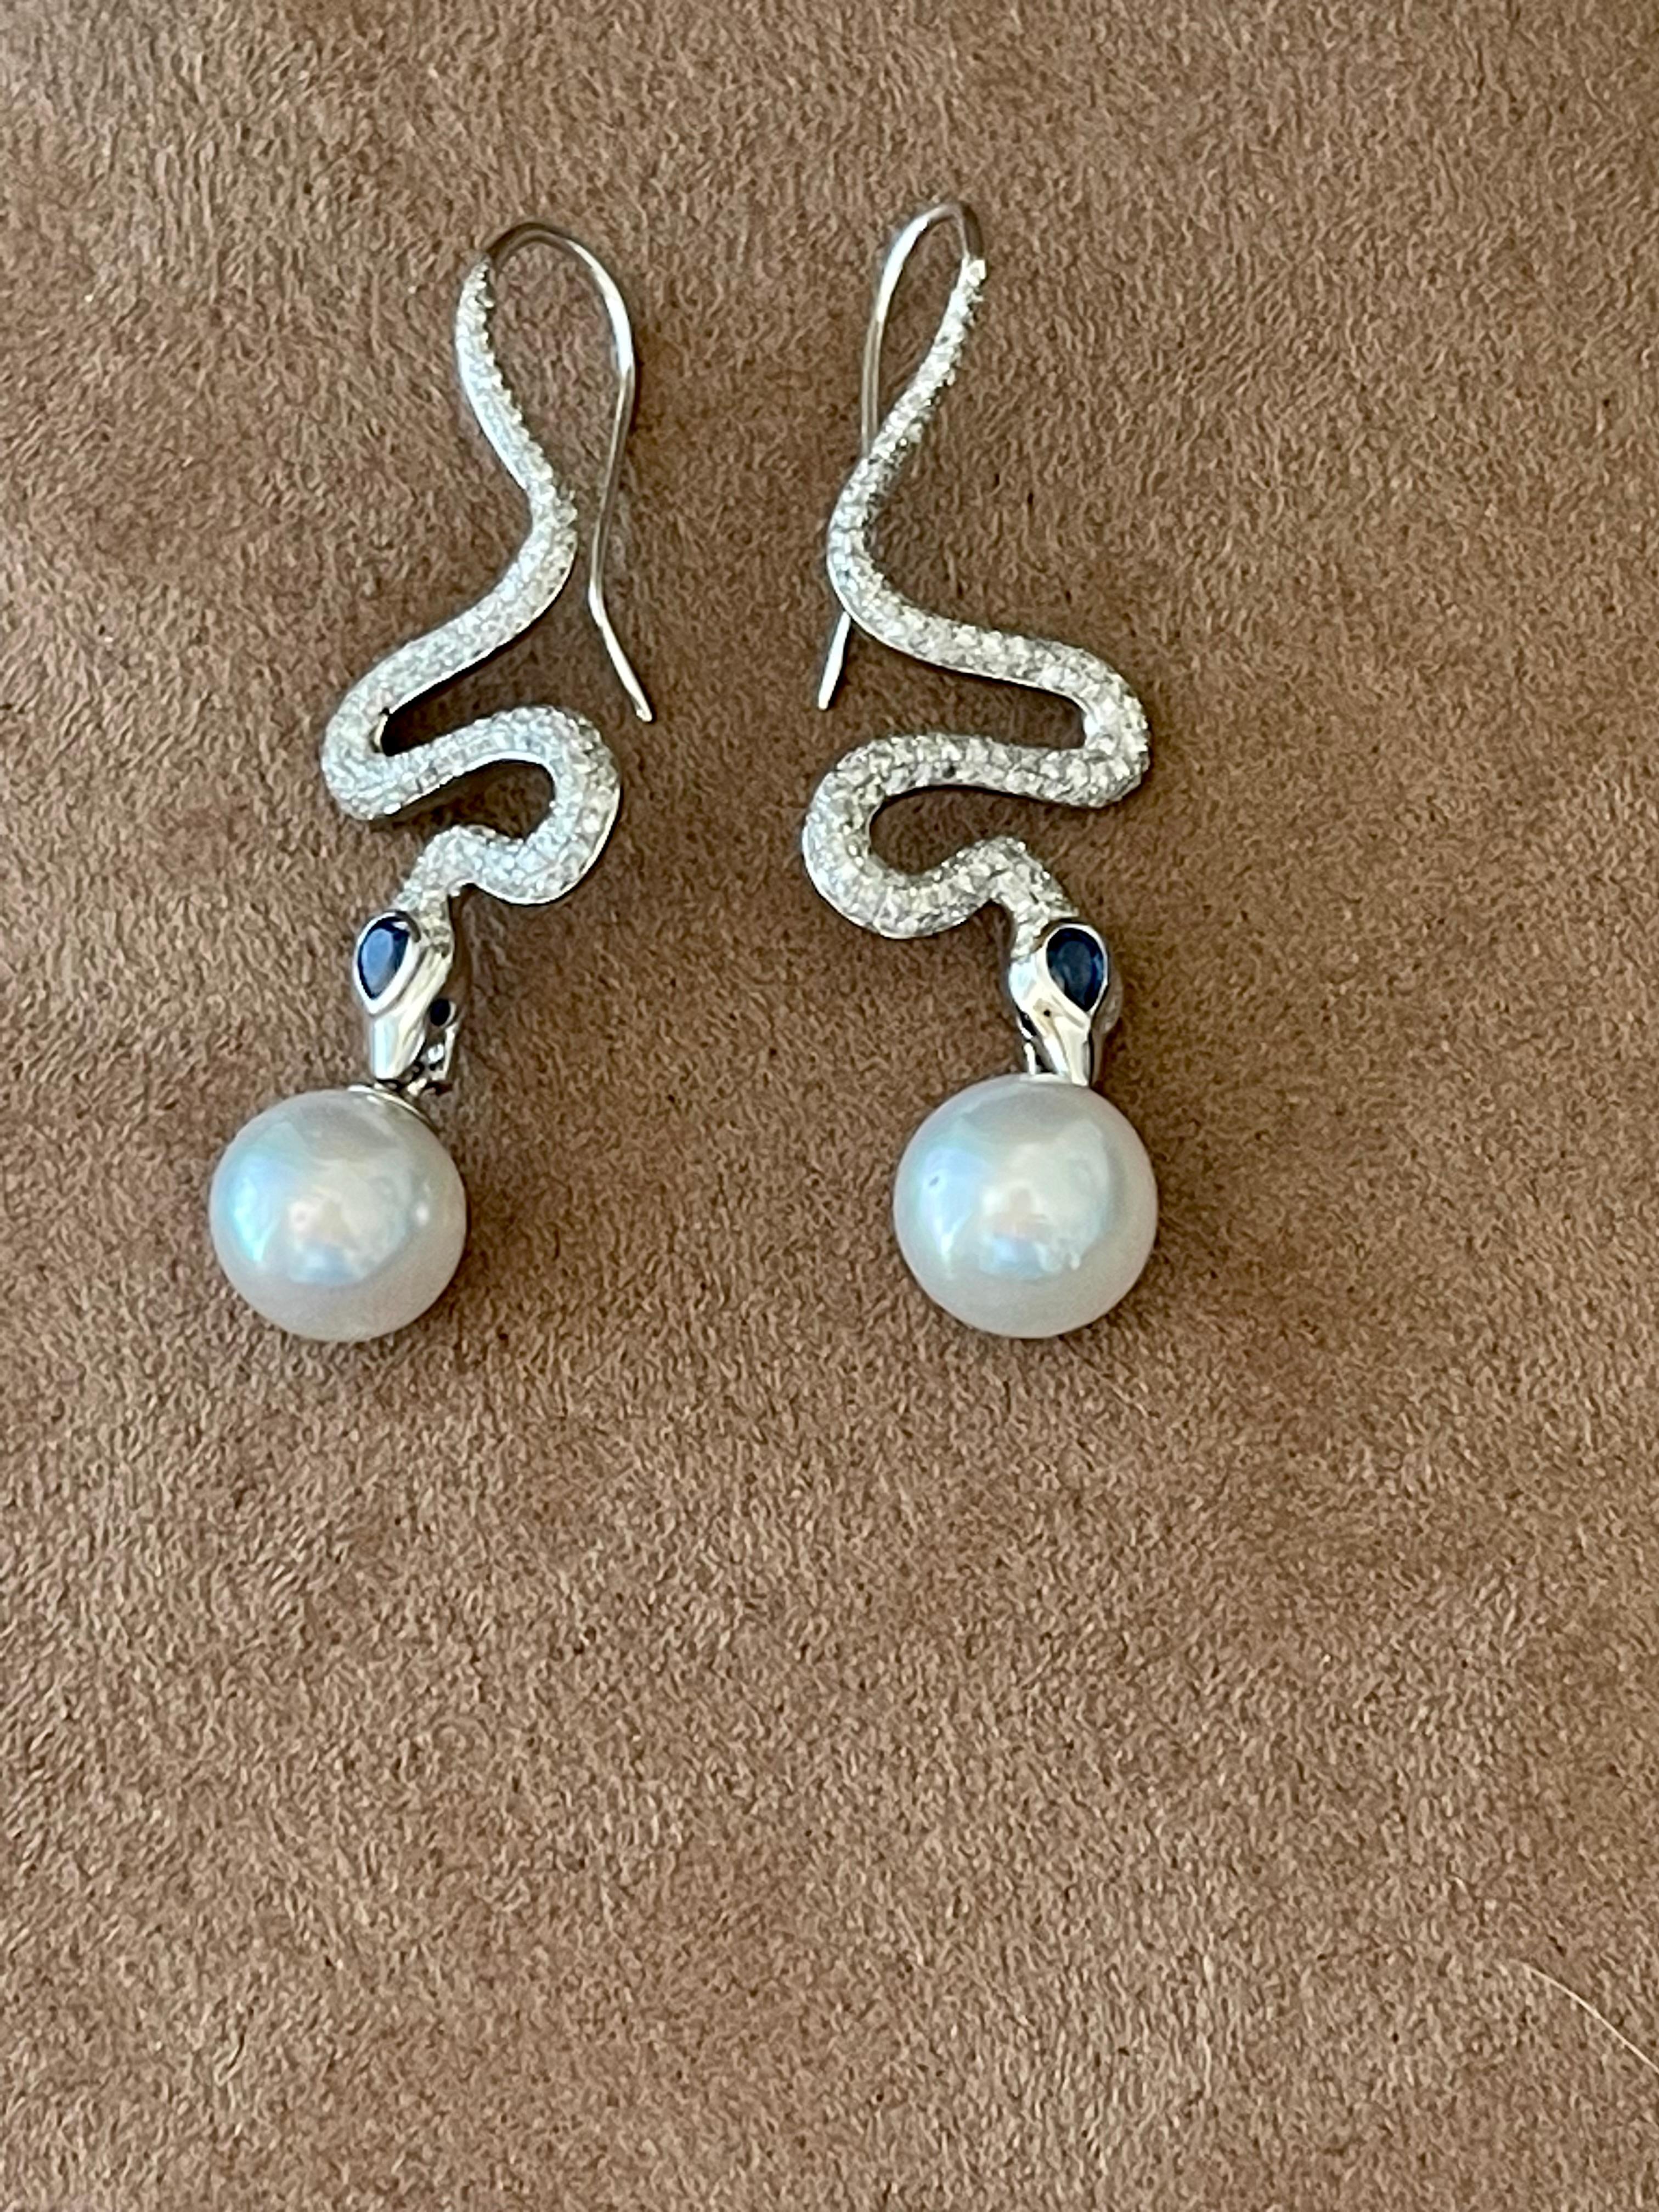 A pair of unique 18 K white Gold  Snake earrings featuring 2 fine South Sea Pearls (1.04 mm), 328 brilliant cut Diamonds weighing 1.31 ct and 6 blue Sapphires weighing 0.48 ct. Length: 5.30 cm. 
The image of the snake has been used in jewelry for